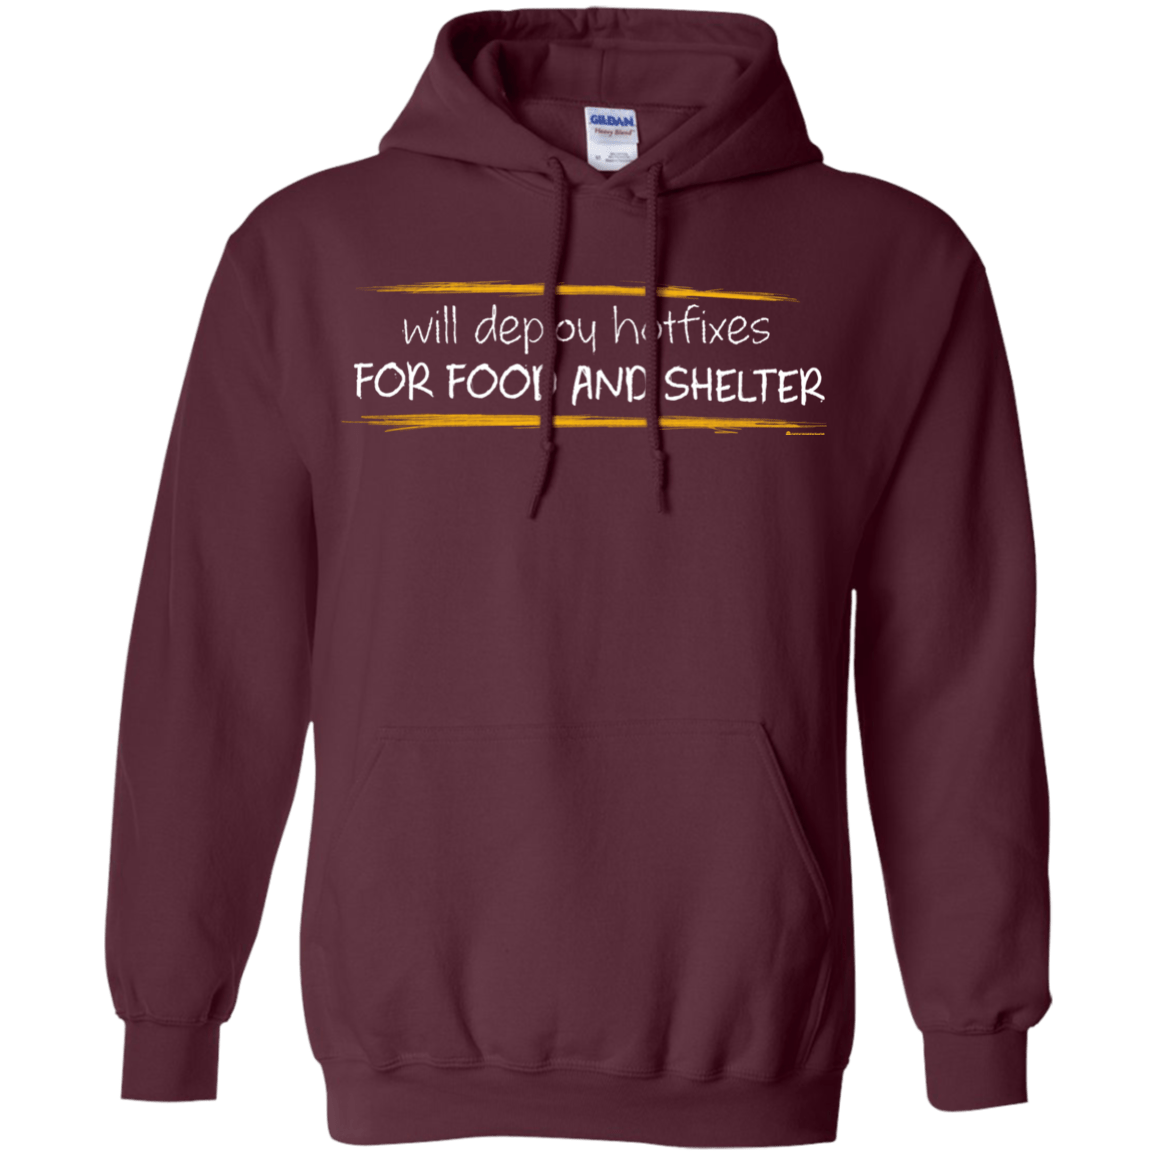 Sweatshirts Maroon / Small Deploying Hotfixes For Food And Shelter Pullover Hoodie